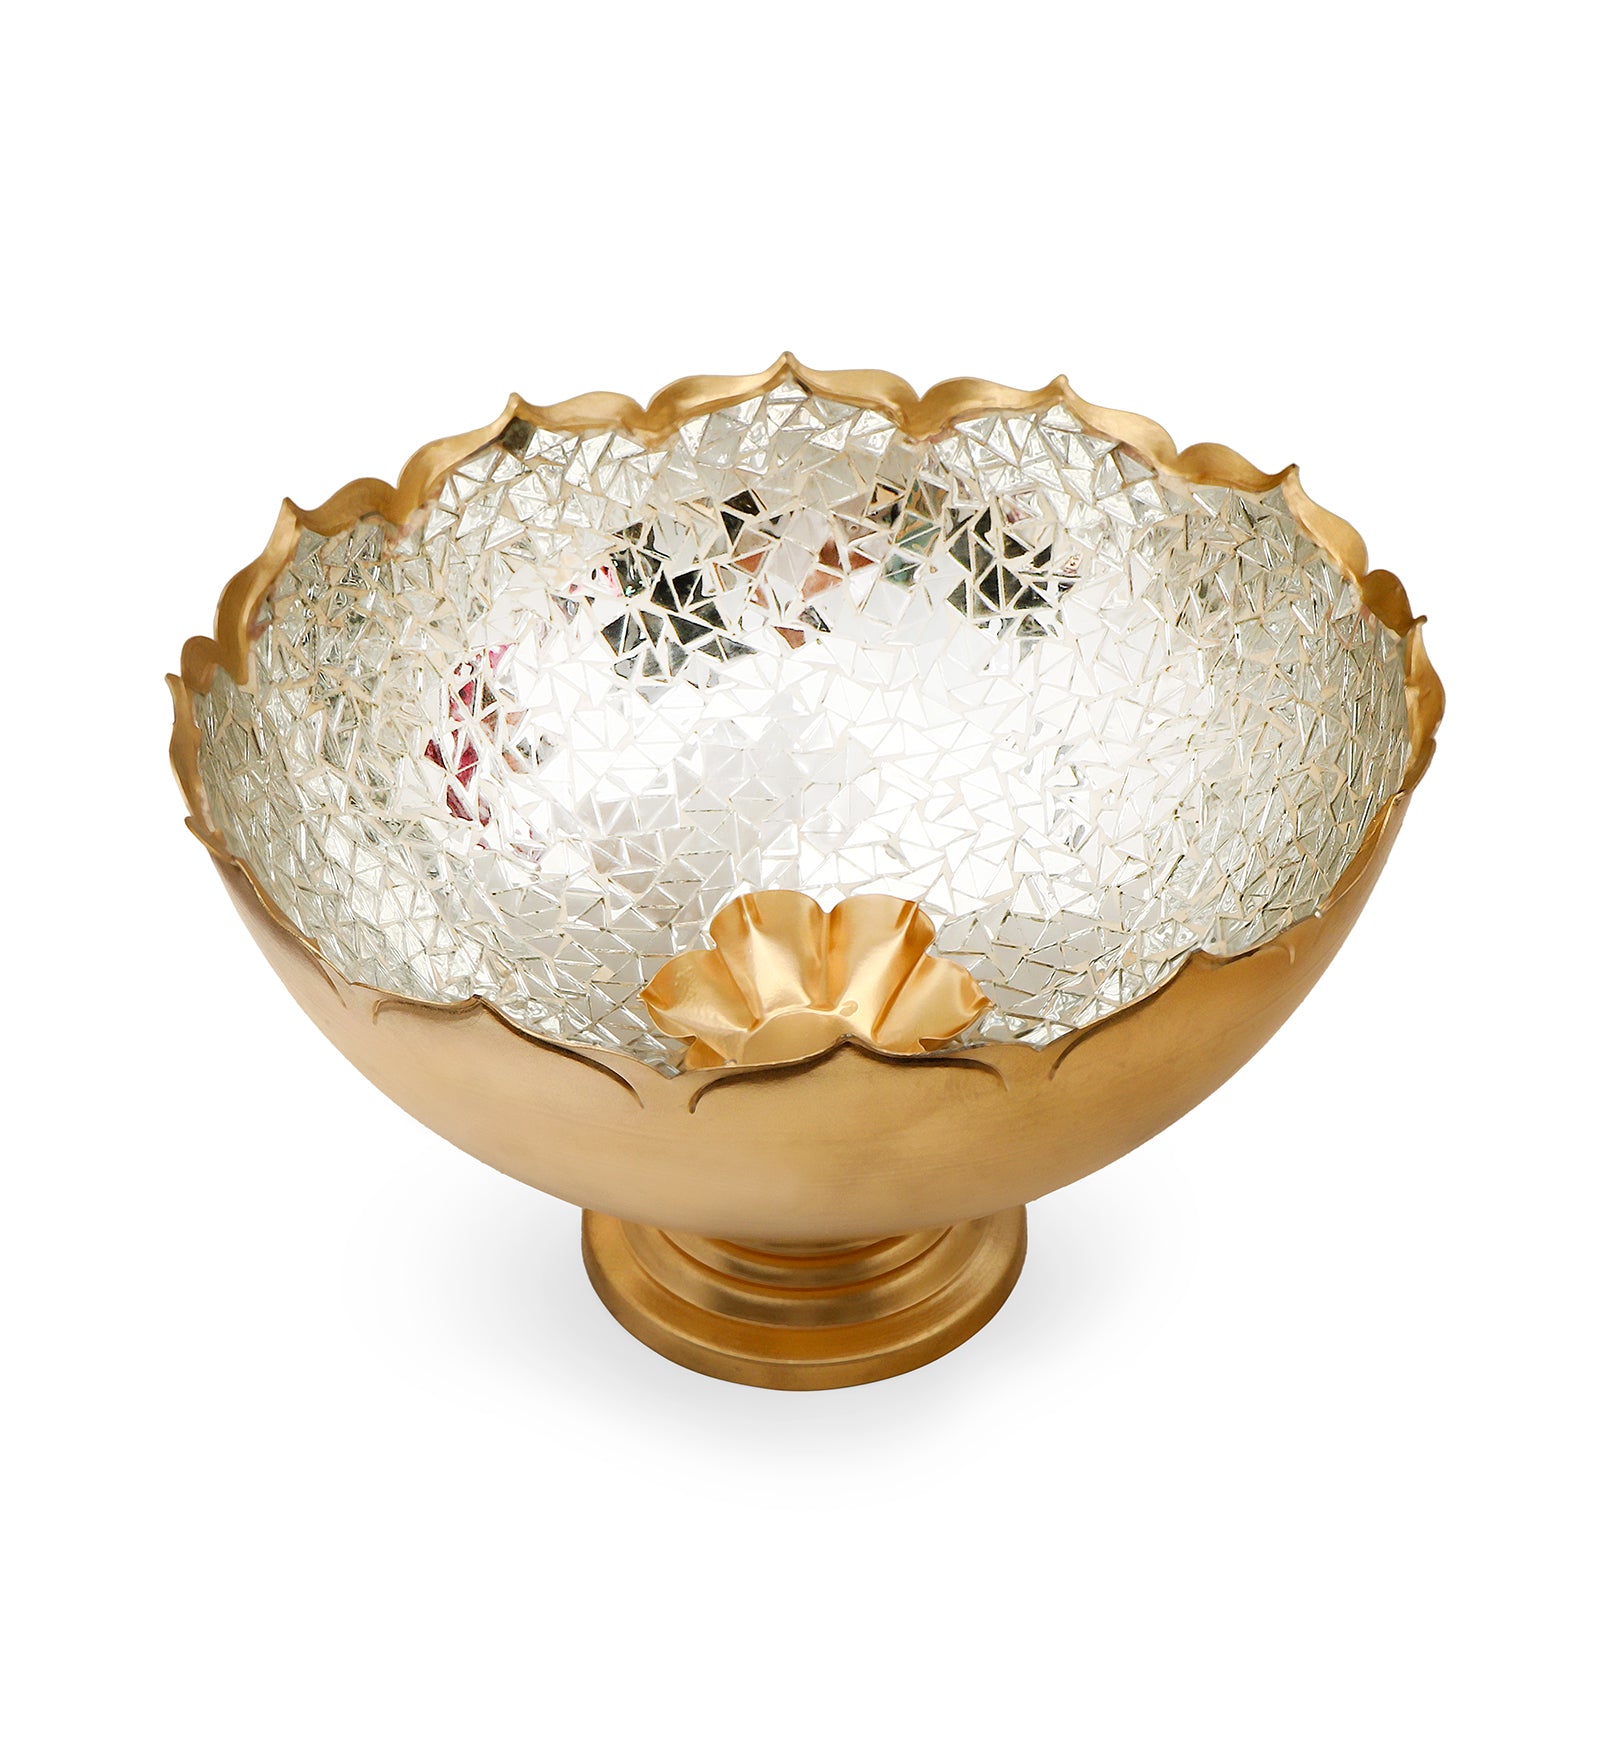 Silver Mosaic Urli With Base 12" Inch 1- The Home Co.